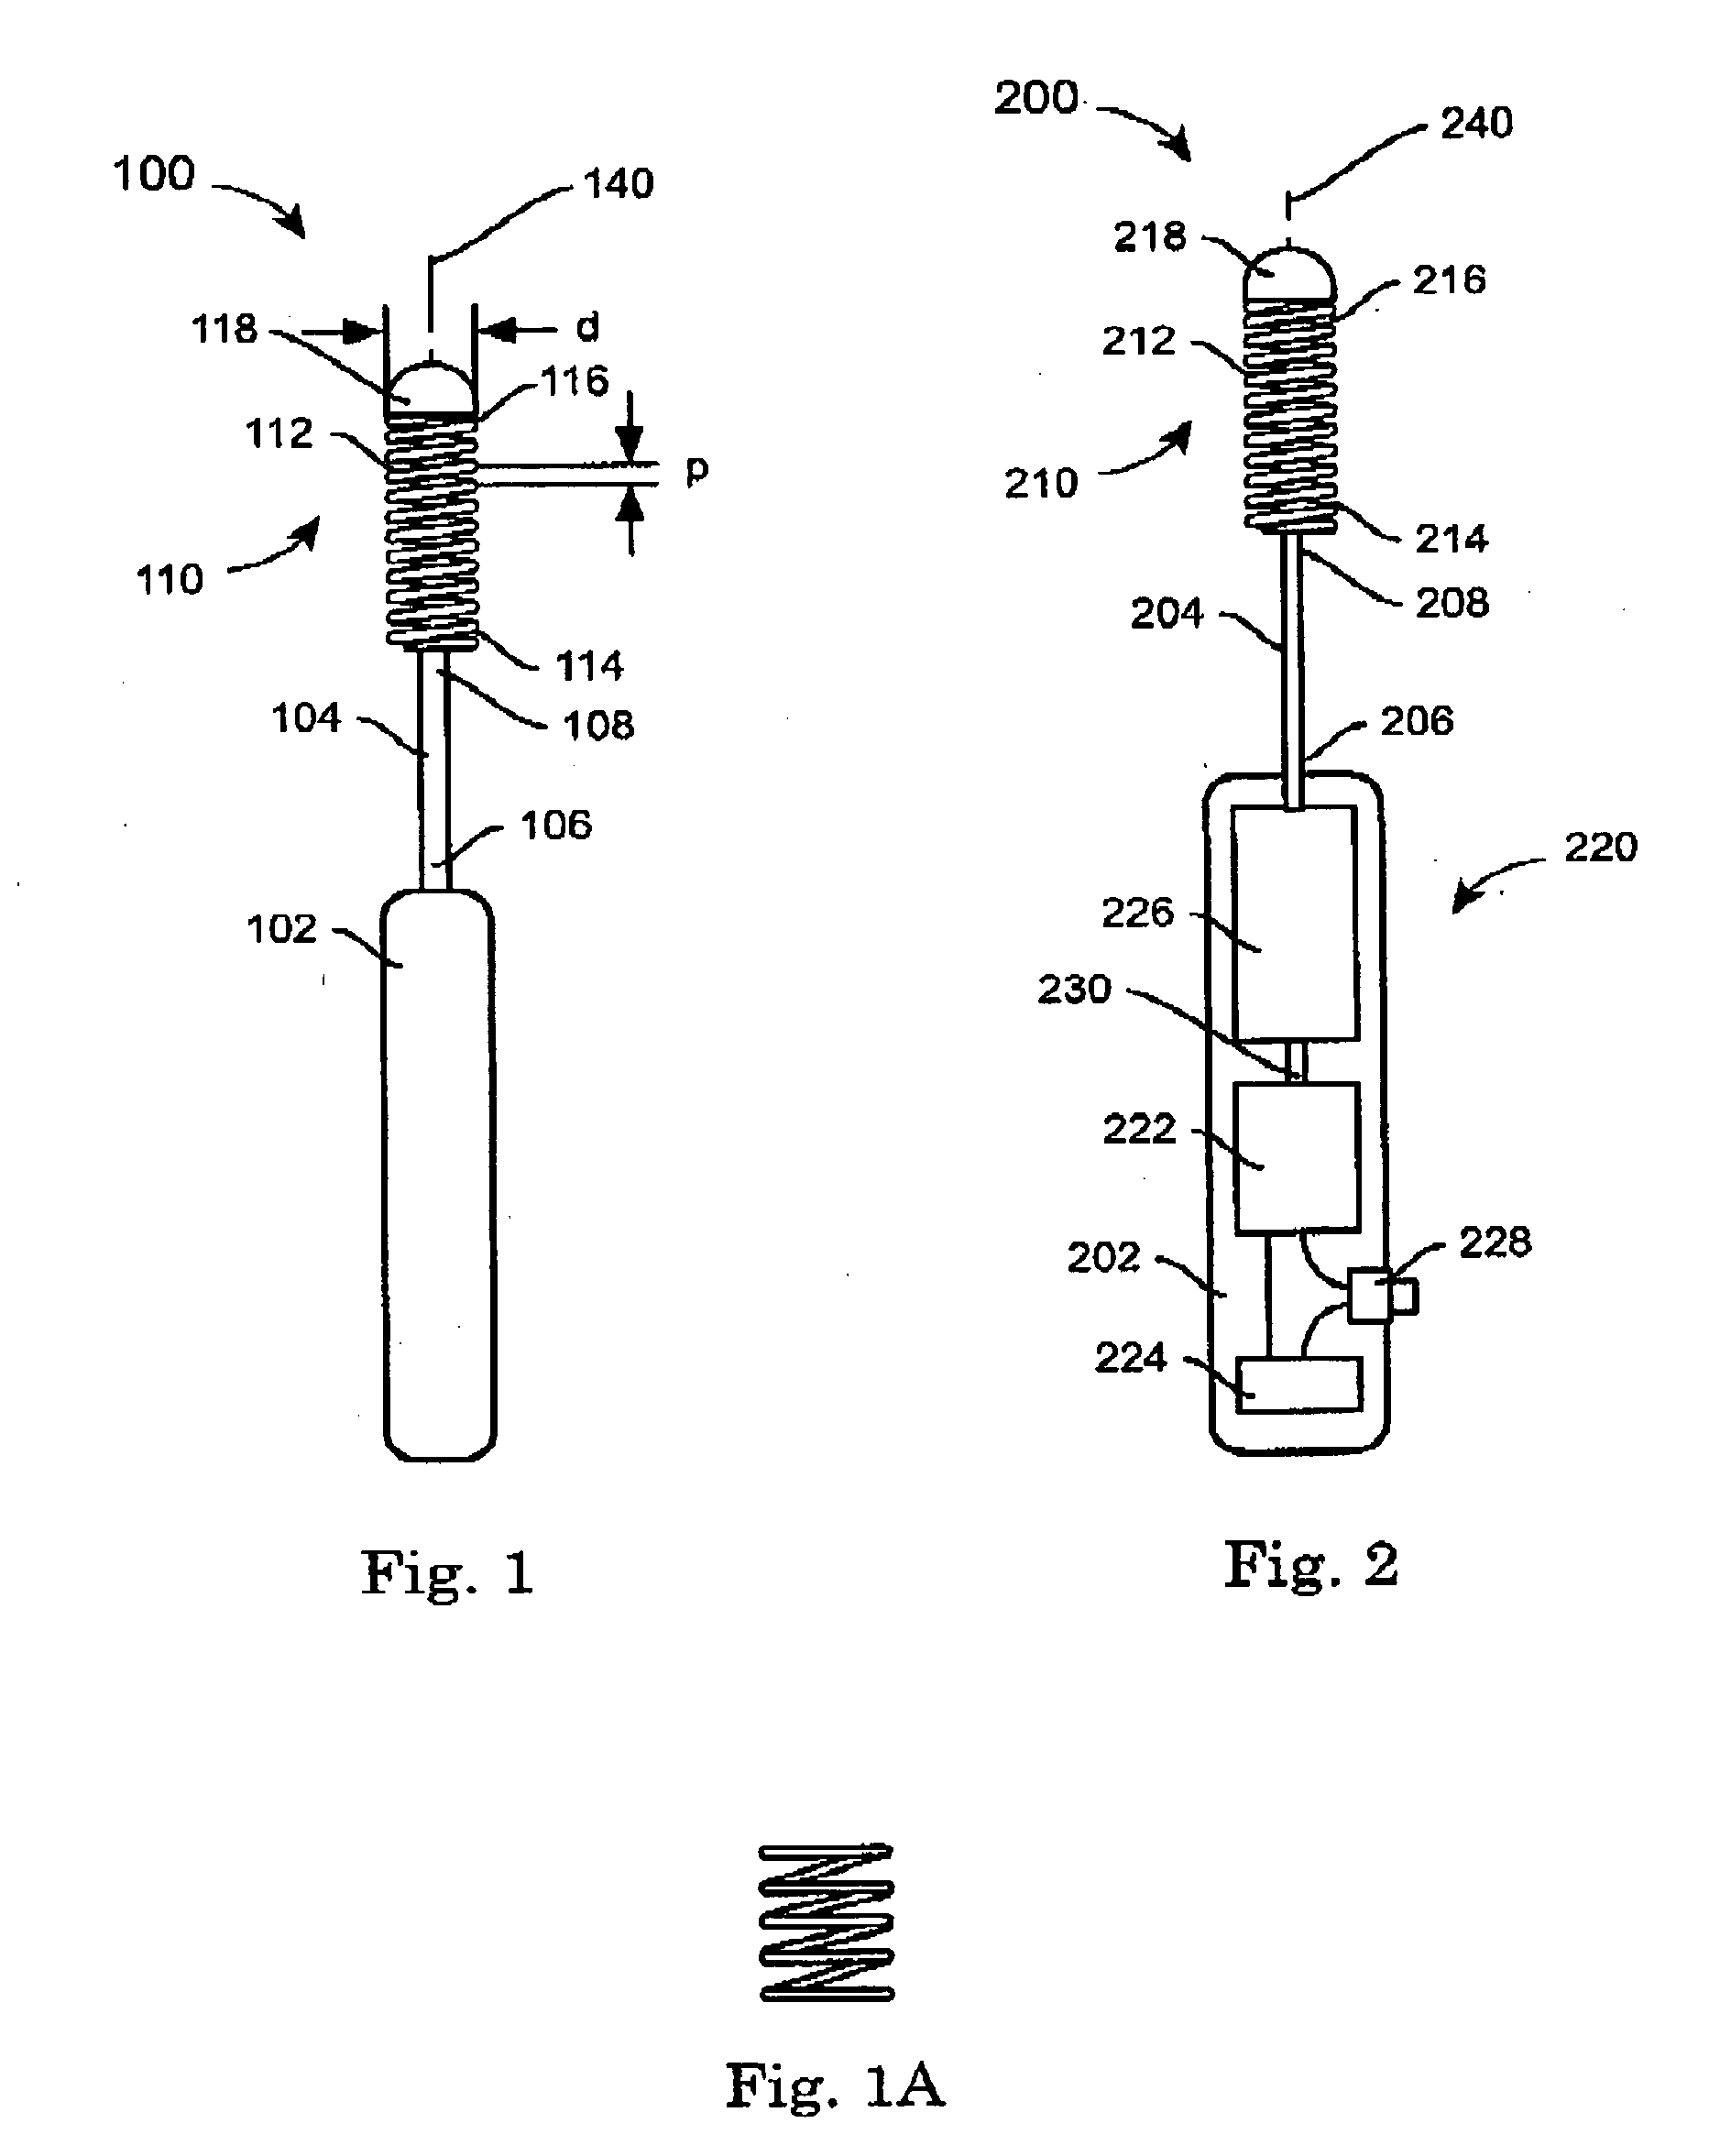 Applicator system with helical applicator surface and source